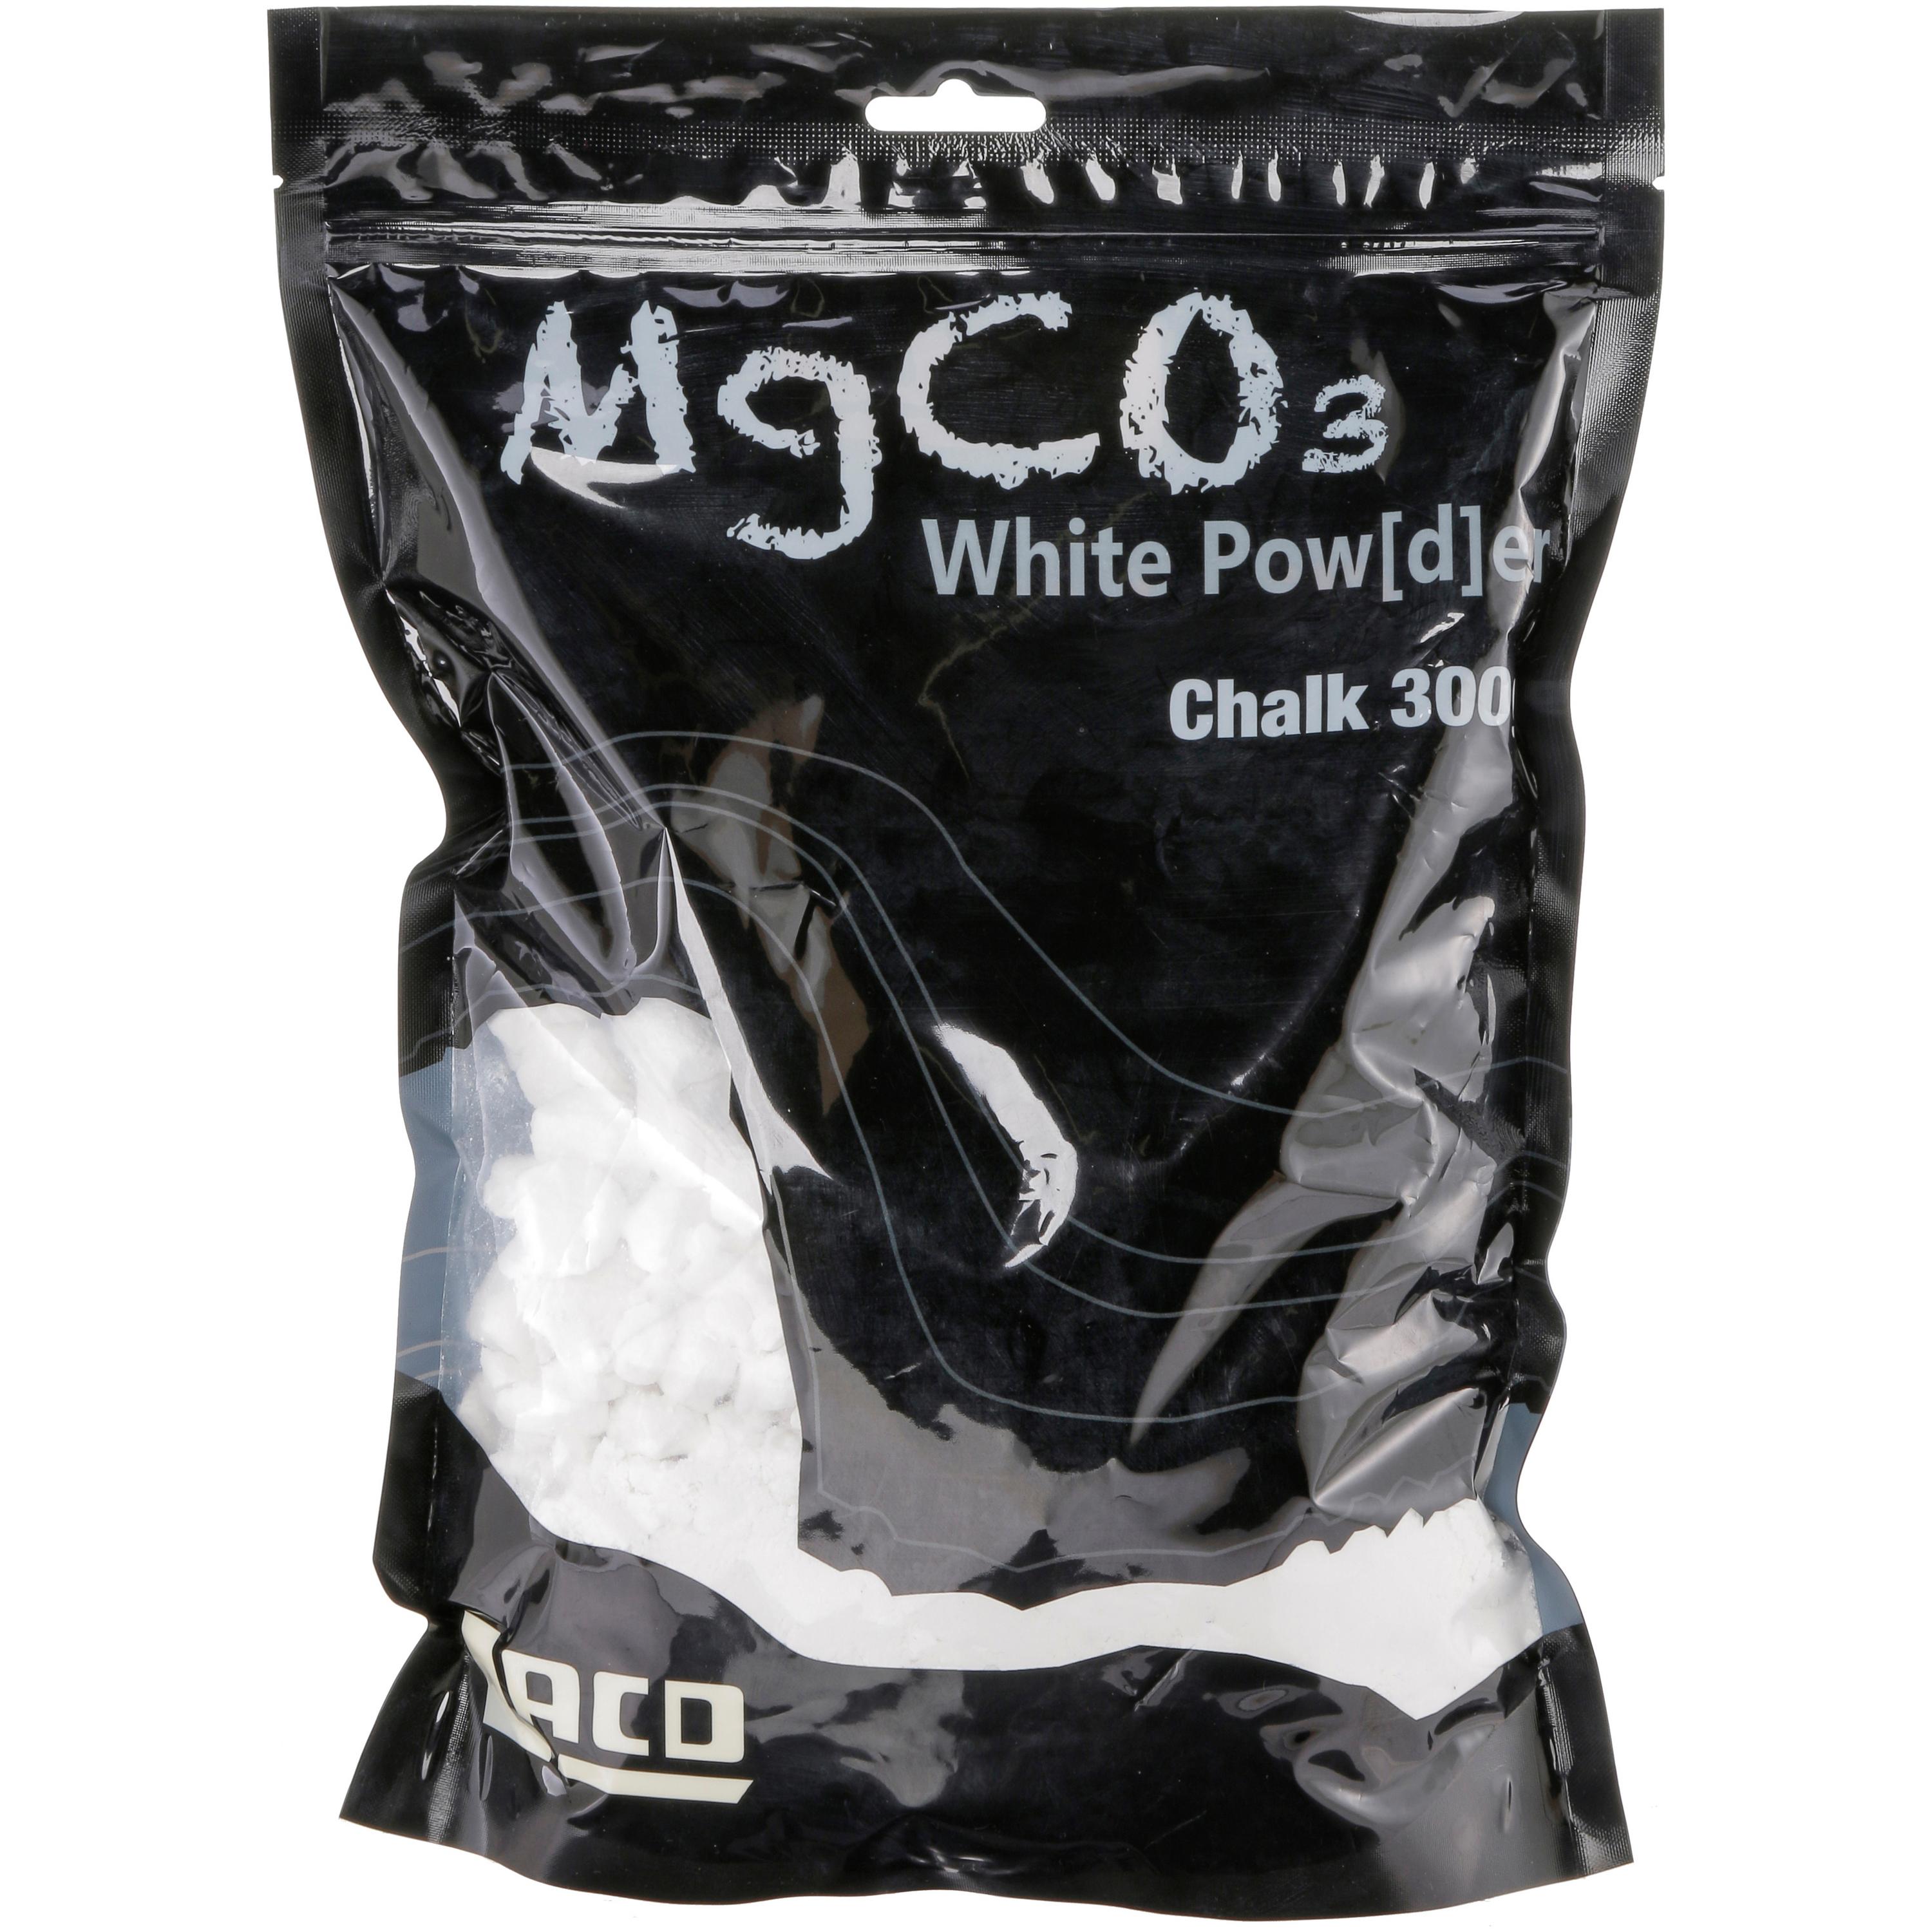 Image of LACD Chalk